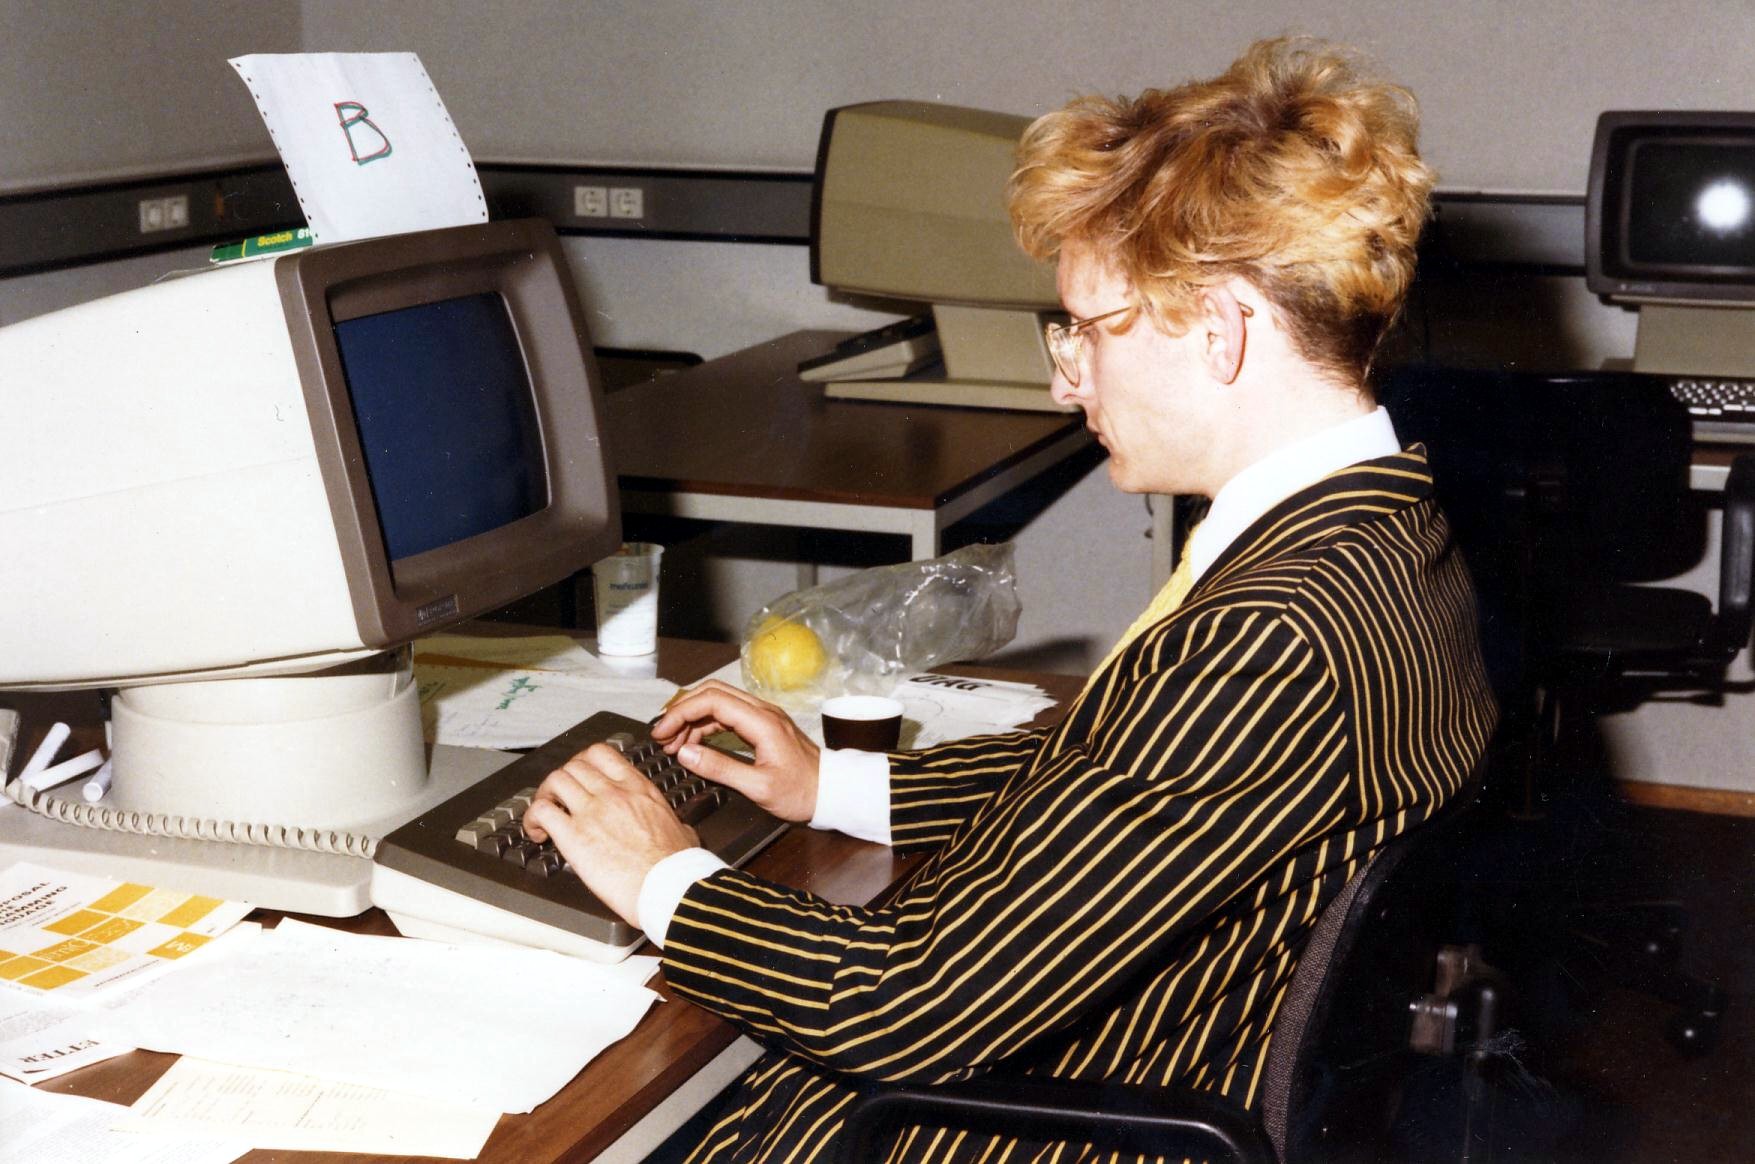 Steven at a computer in the 80's